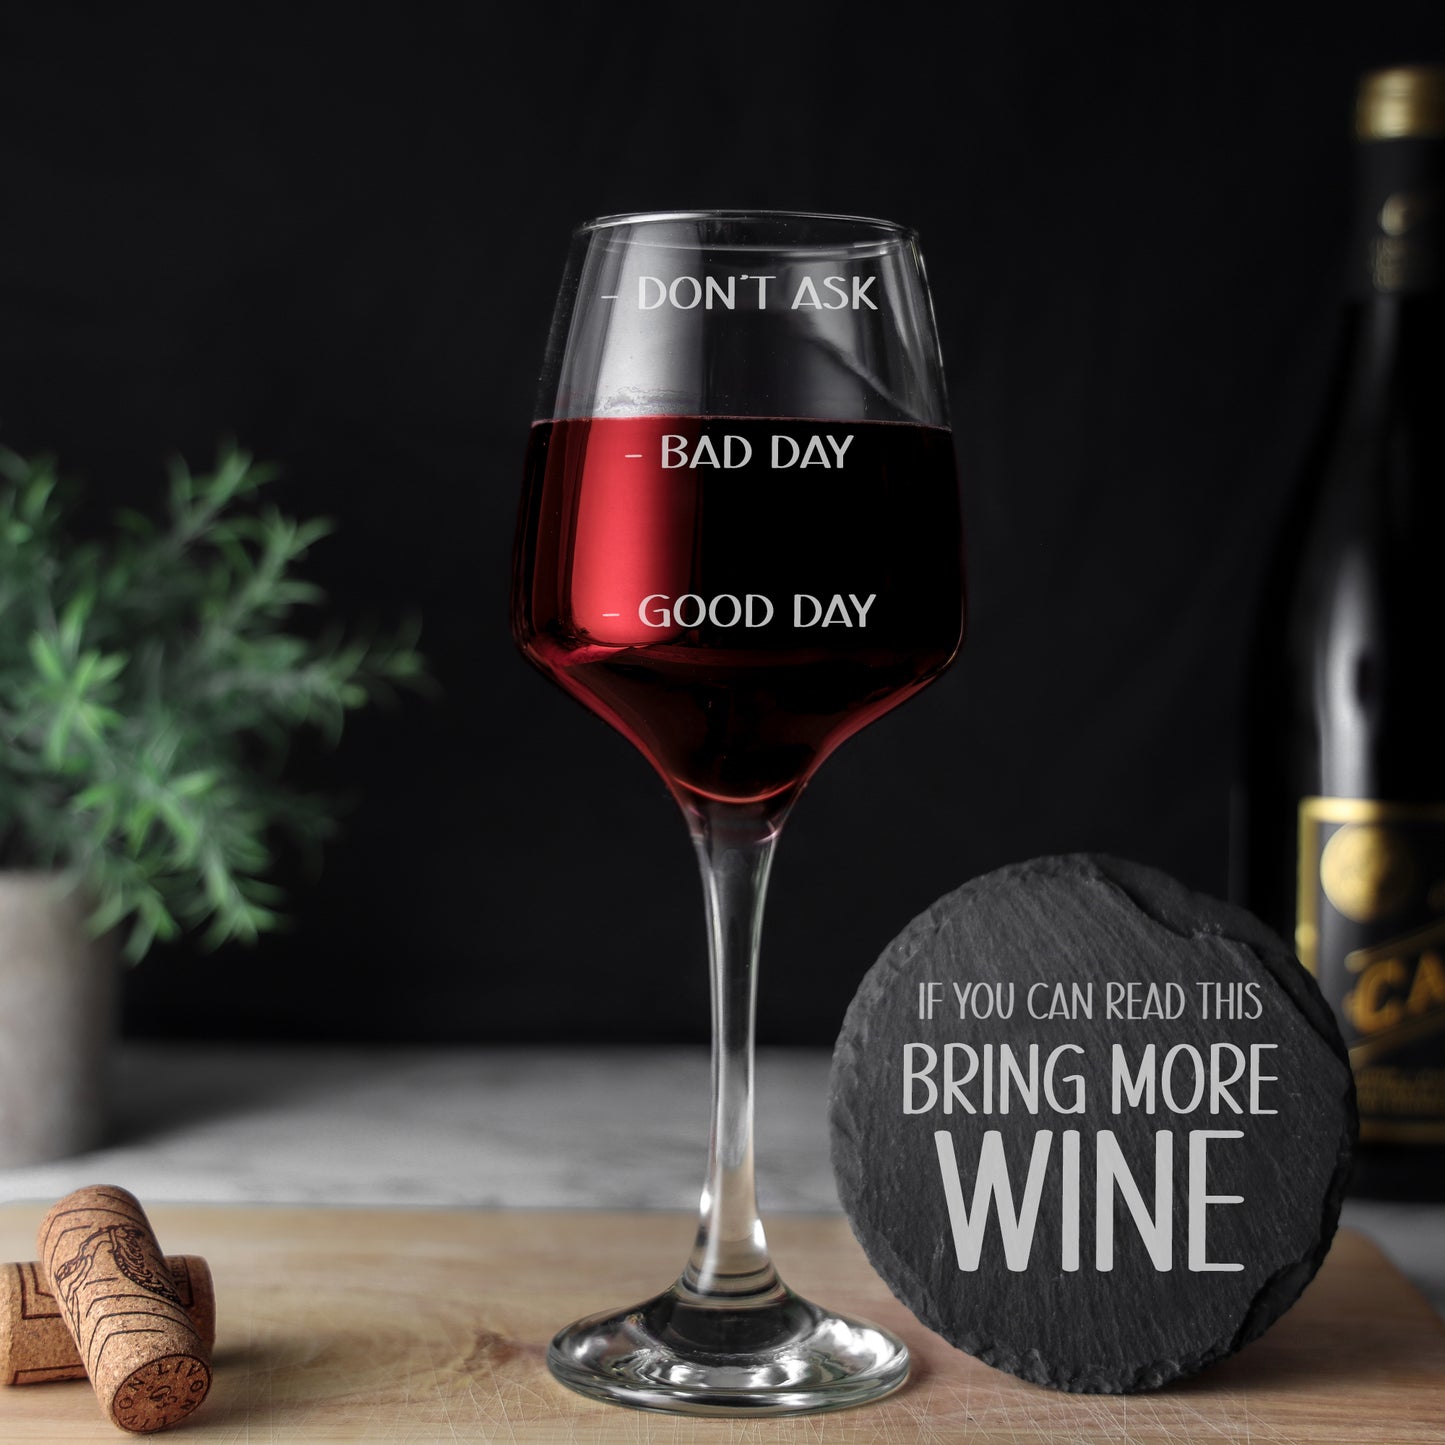 Engraved "Good Day, Bad Day, Don't Ask" Wine Glass Wine Glass and/or Coaster Set  - Always Looking Good - Glass & Rounder Coaster  